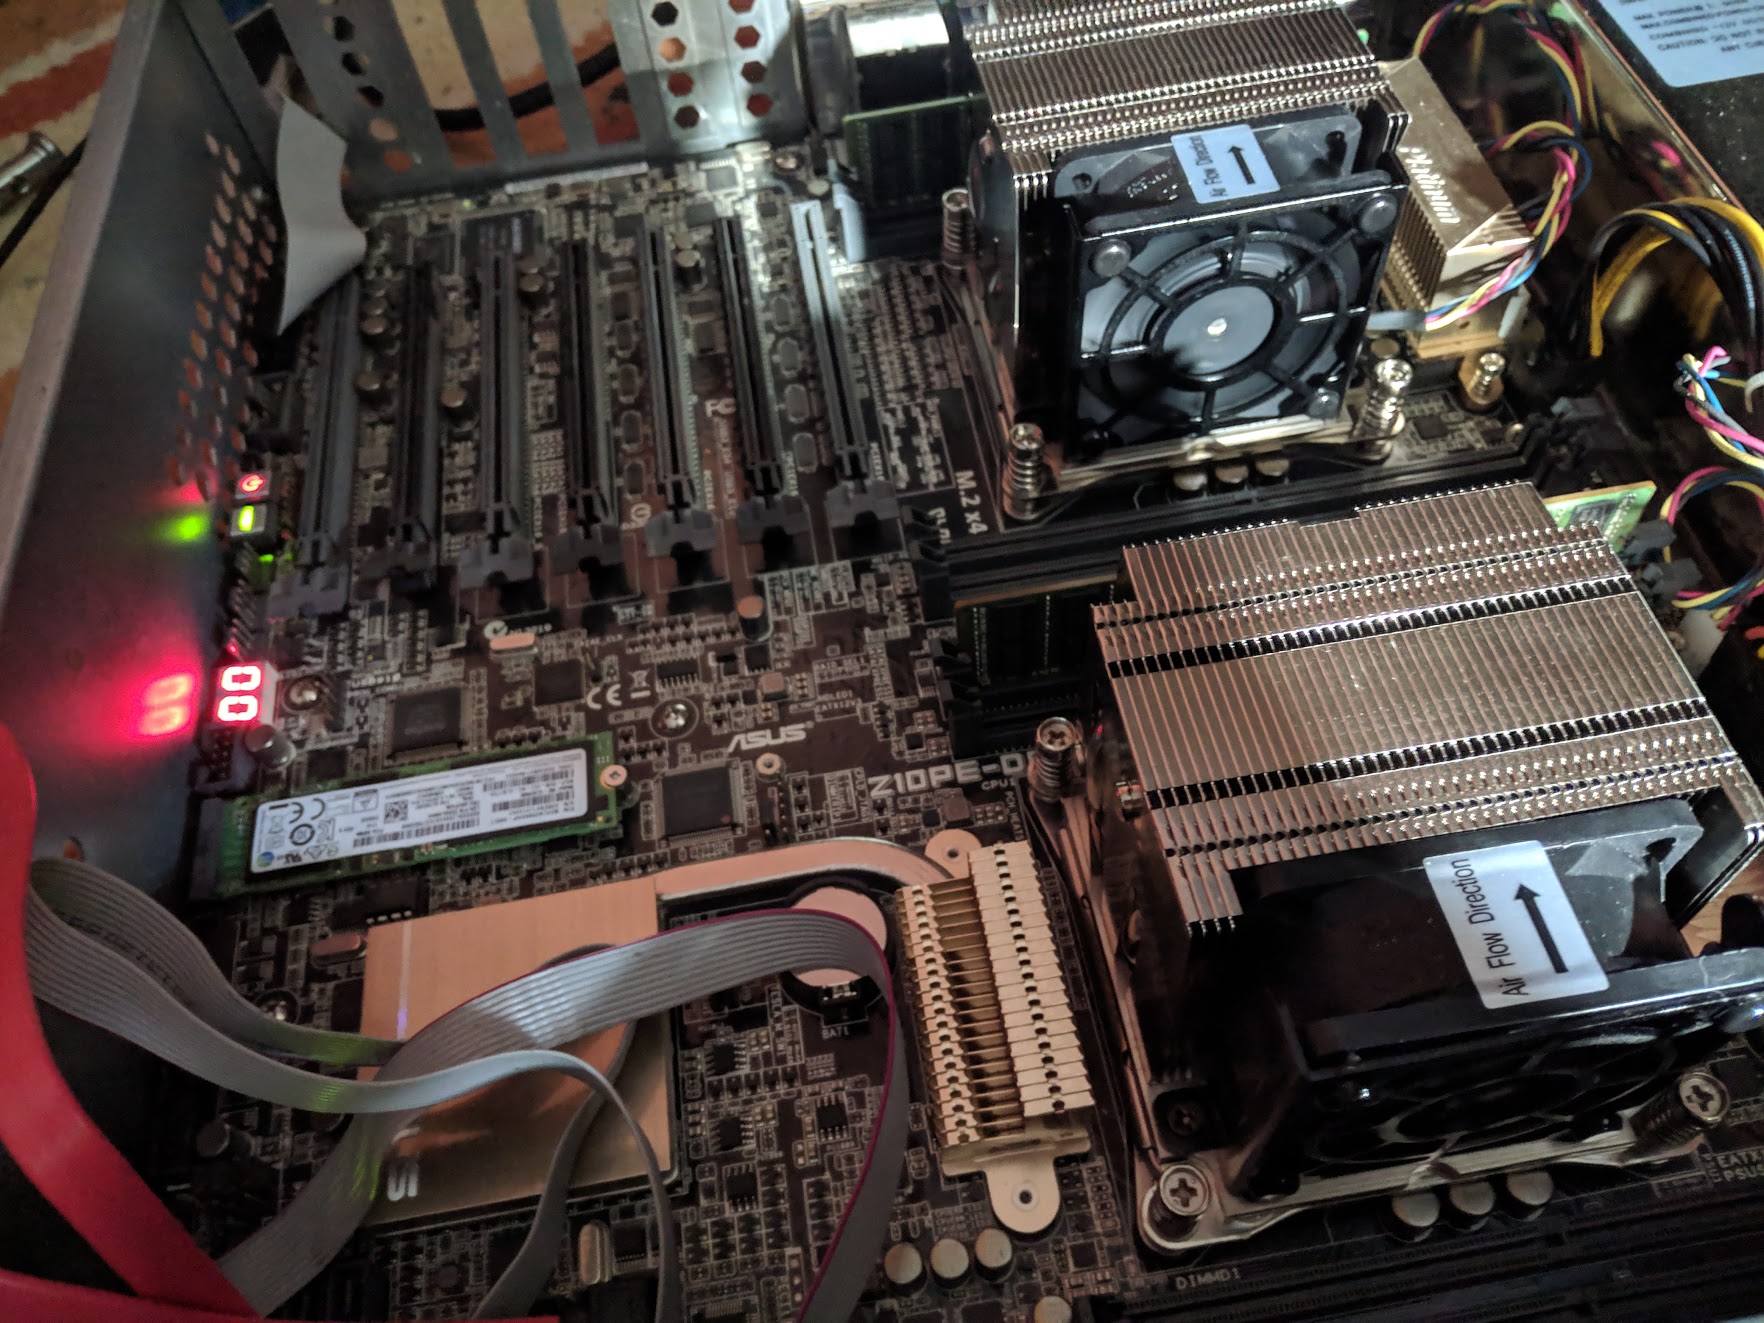 Both heatsinks being shown with the fans running